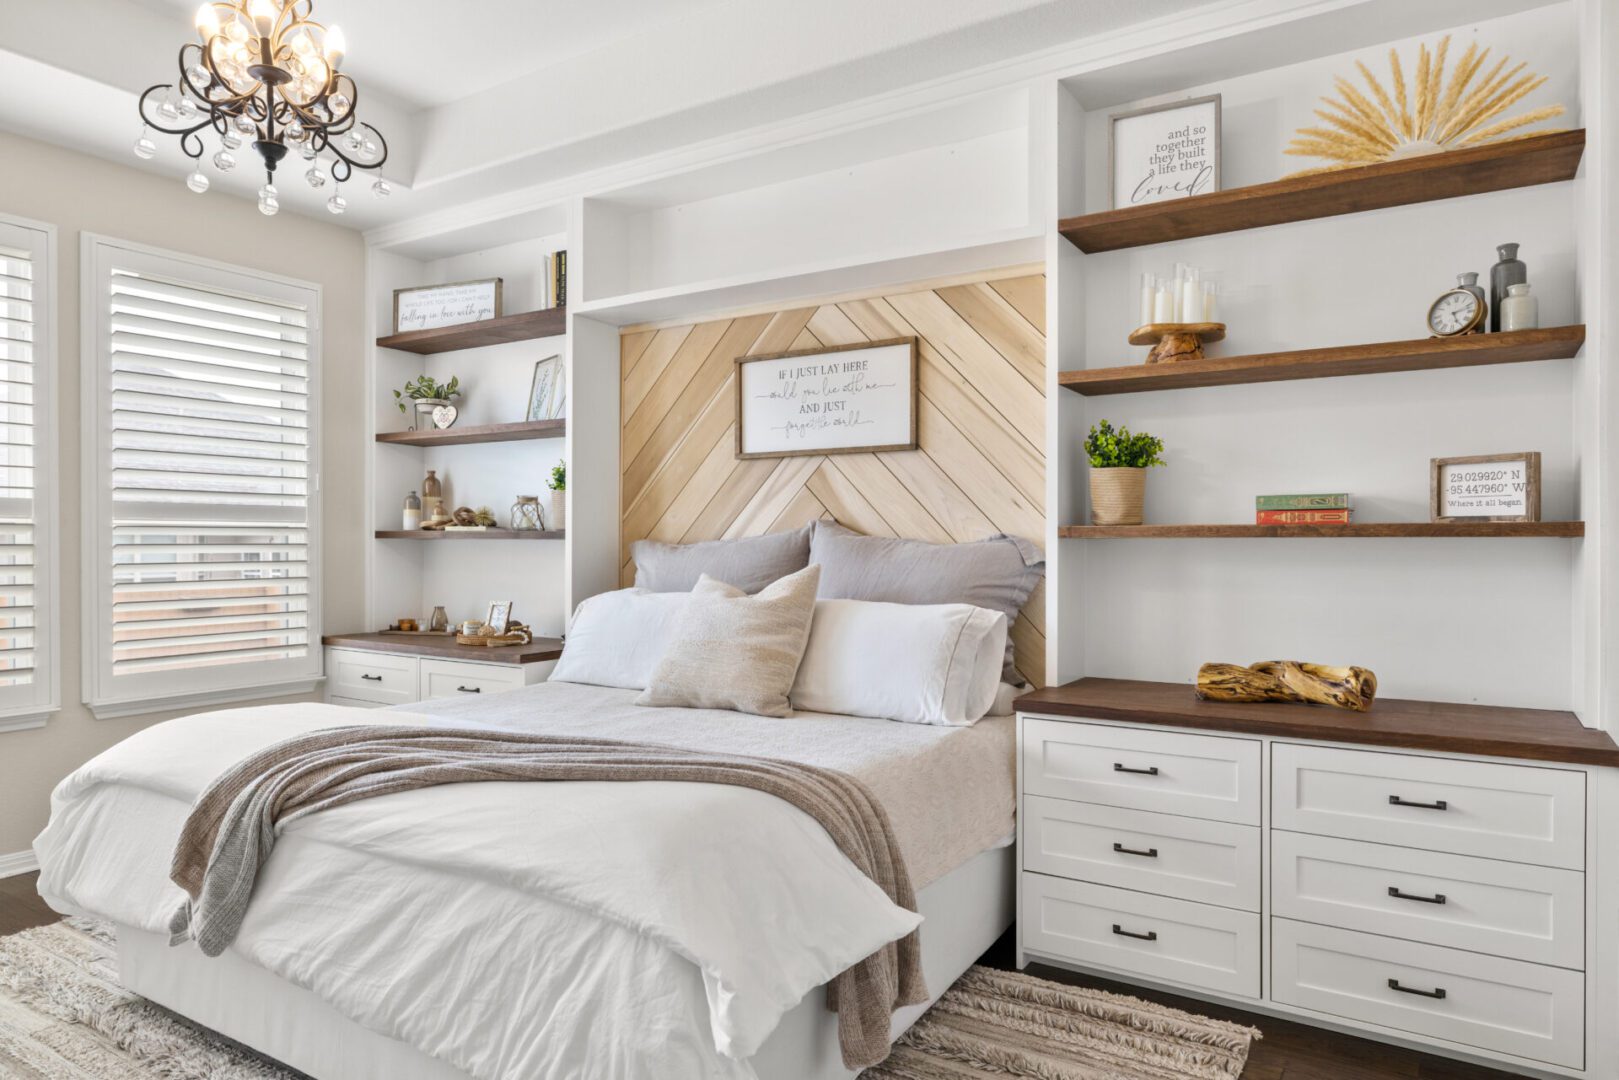 a king size bed and book shelves